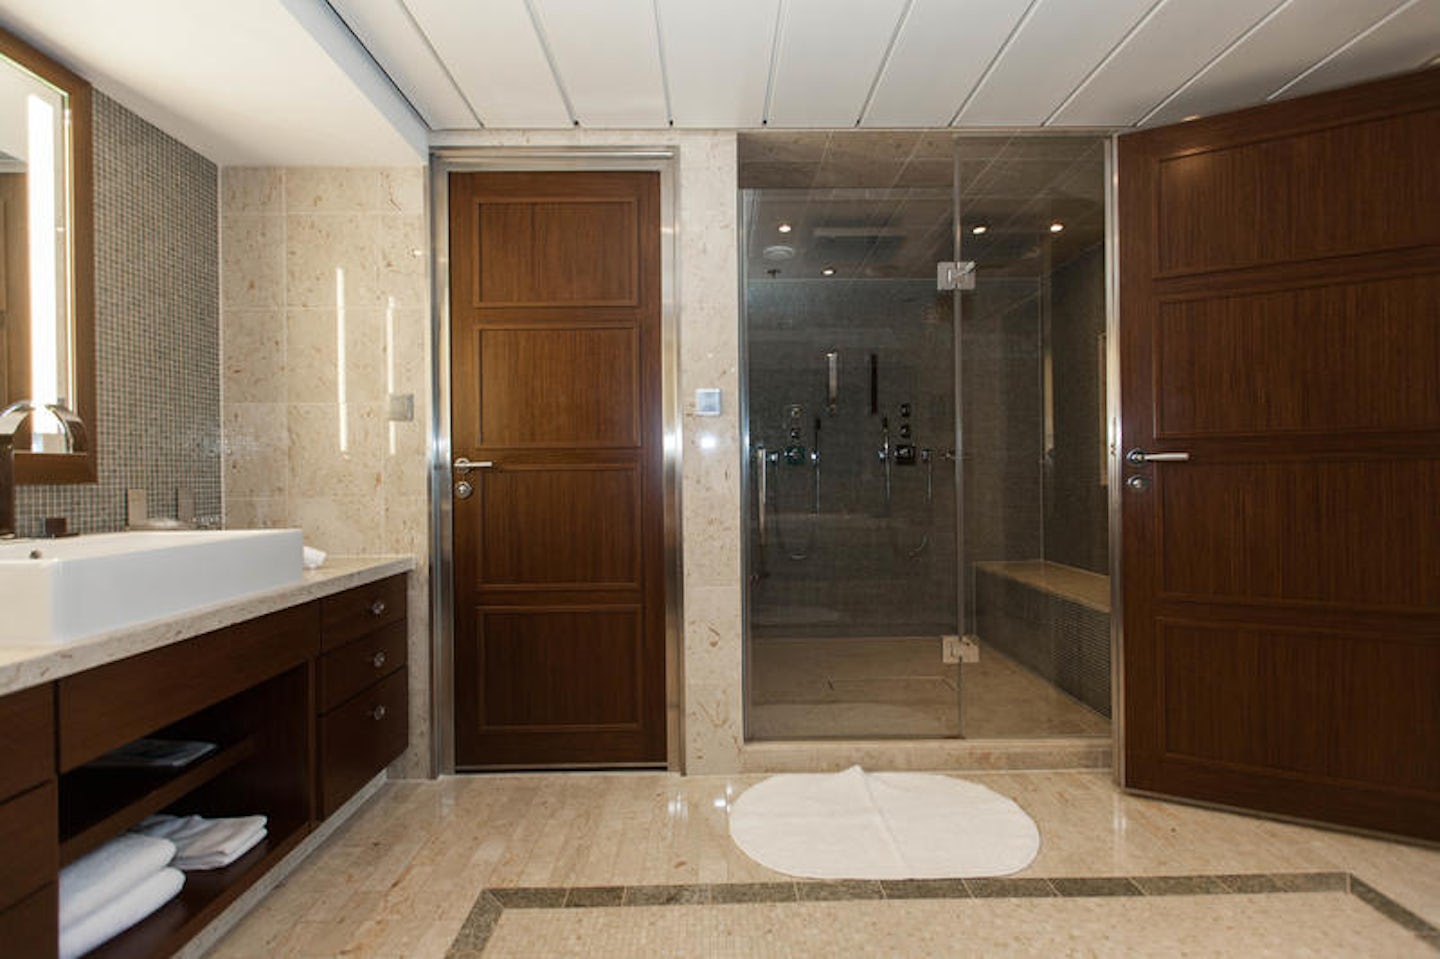 The Penthouse Suite on Celebrity Equinox